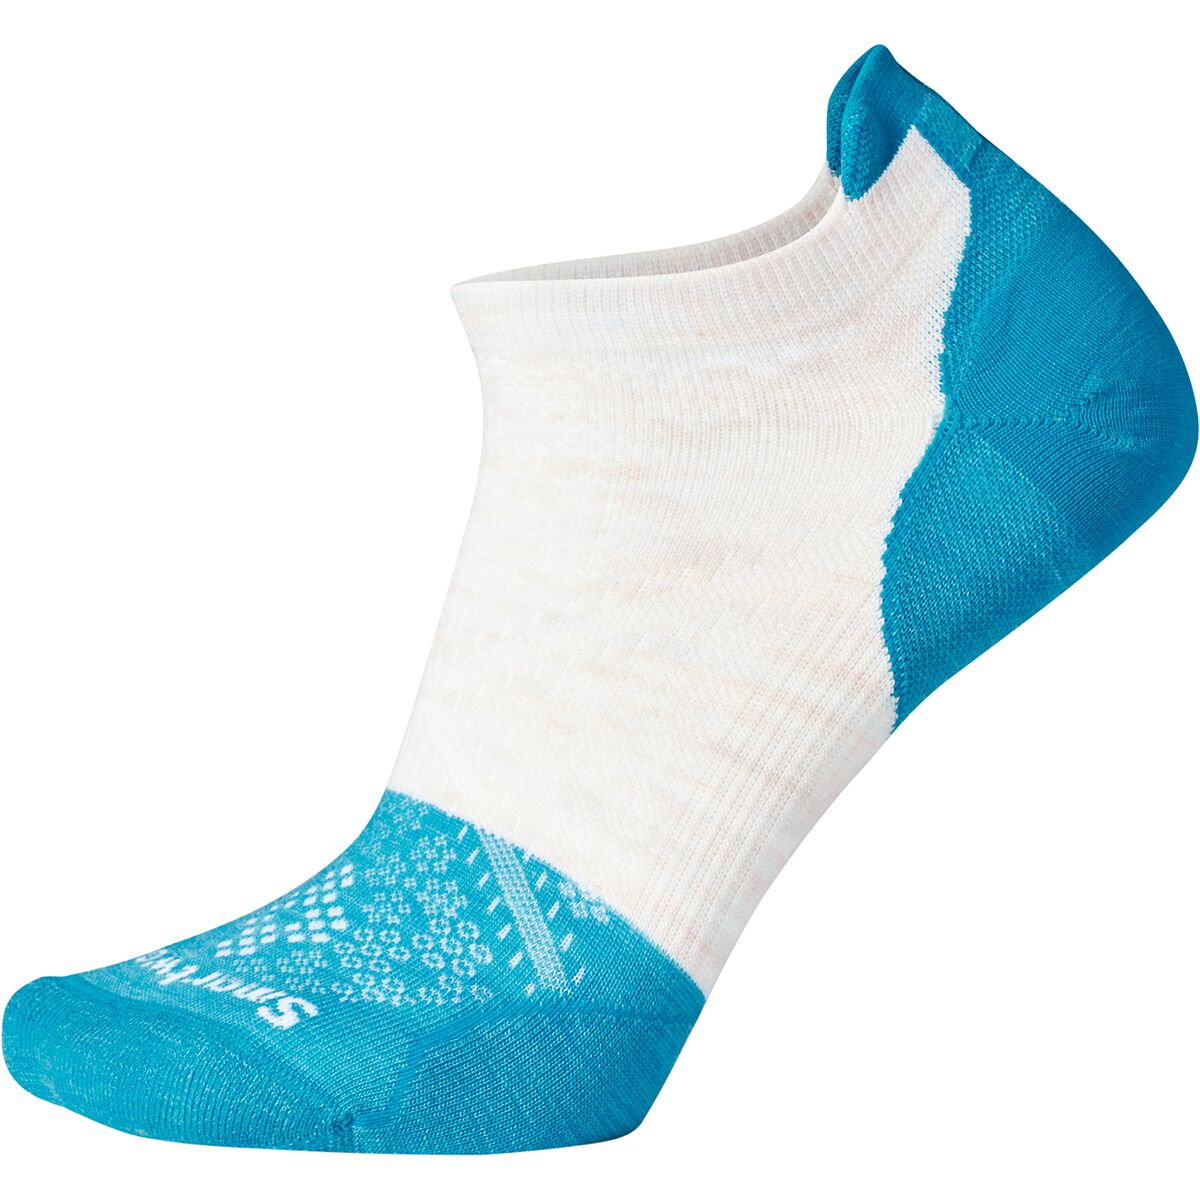 Smartwool Cycle Zero Cushion Low Ankle Sock - Women's